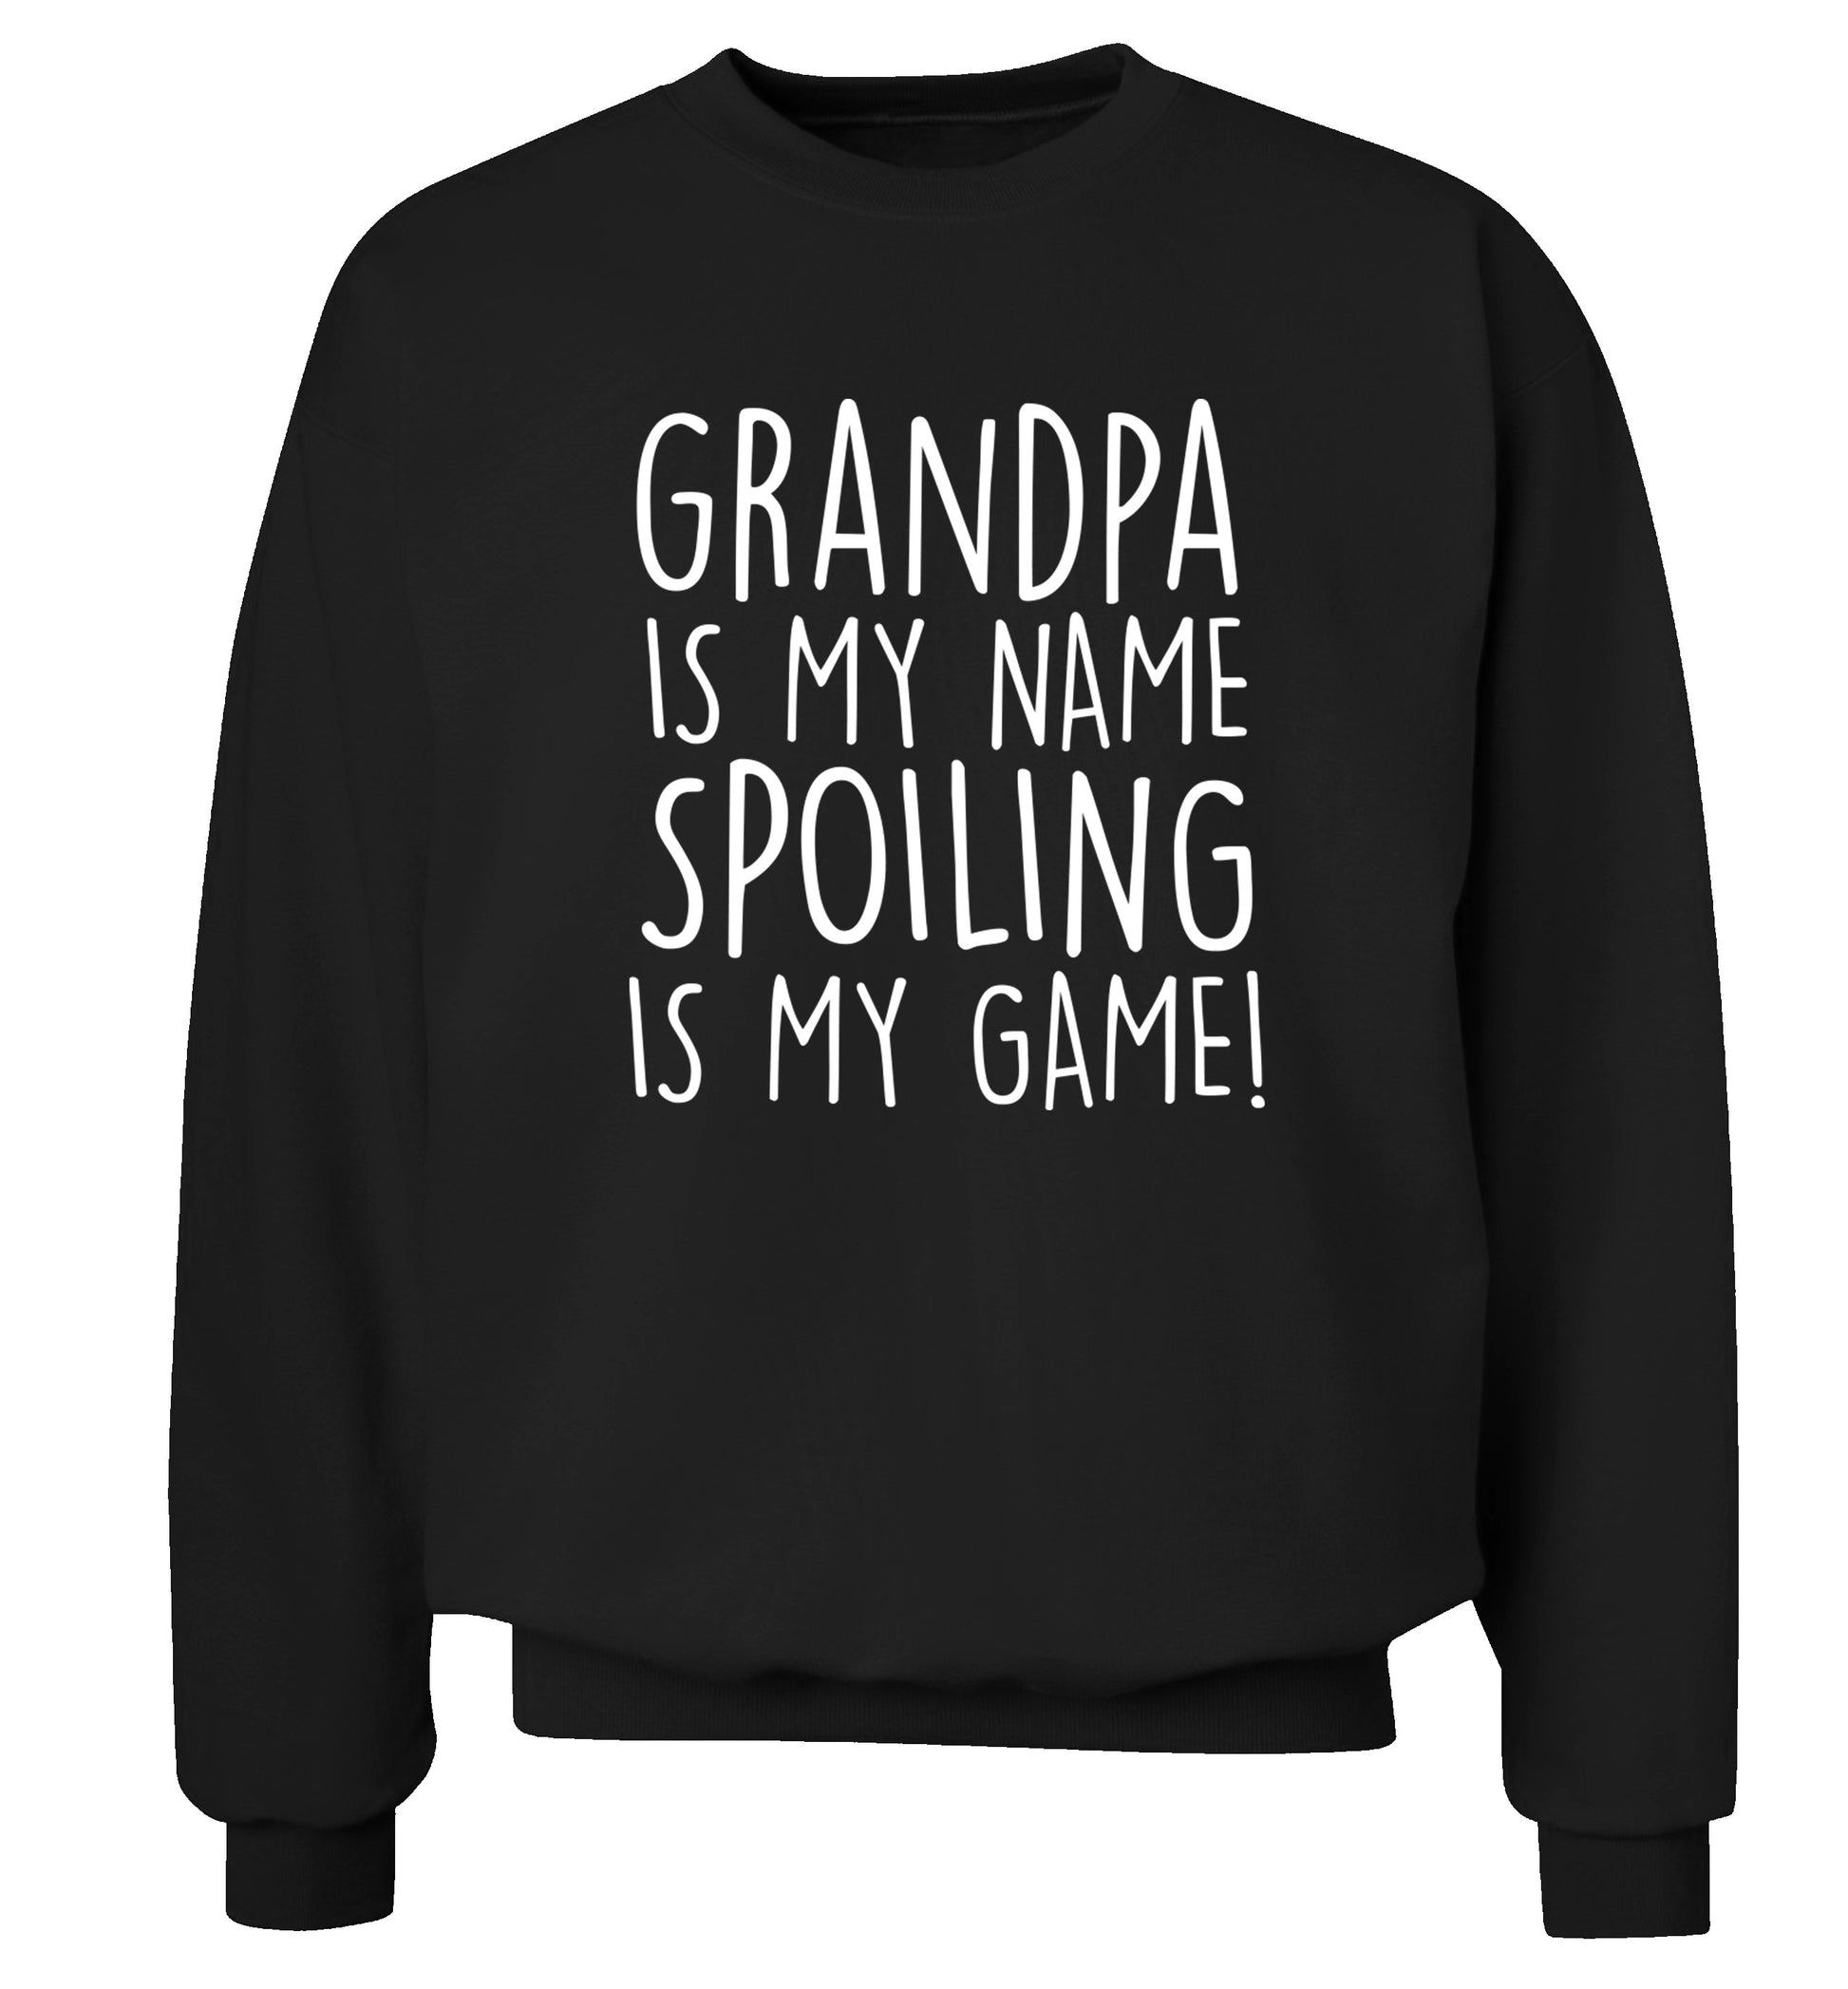 Grandpa is my name, spoiling is my game Adult's unisex black Sweater 2XL